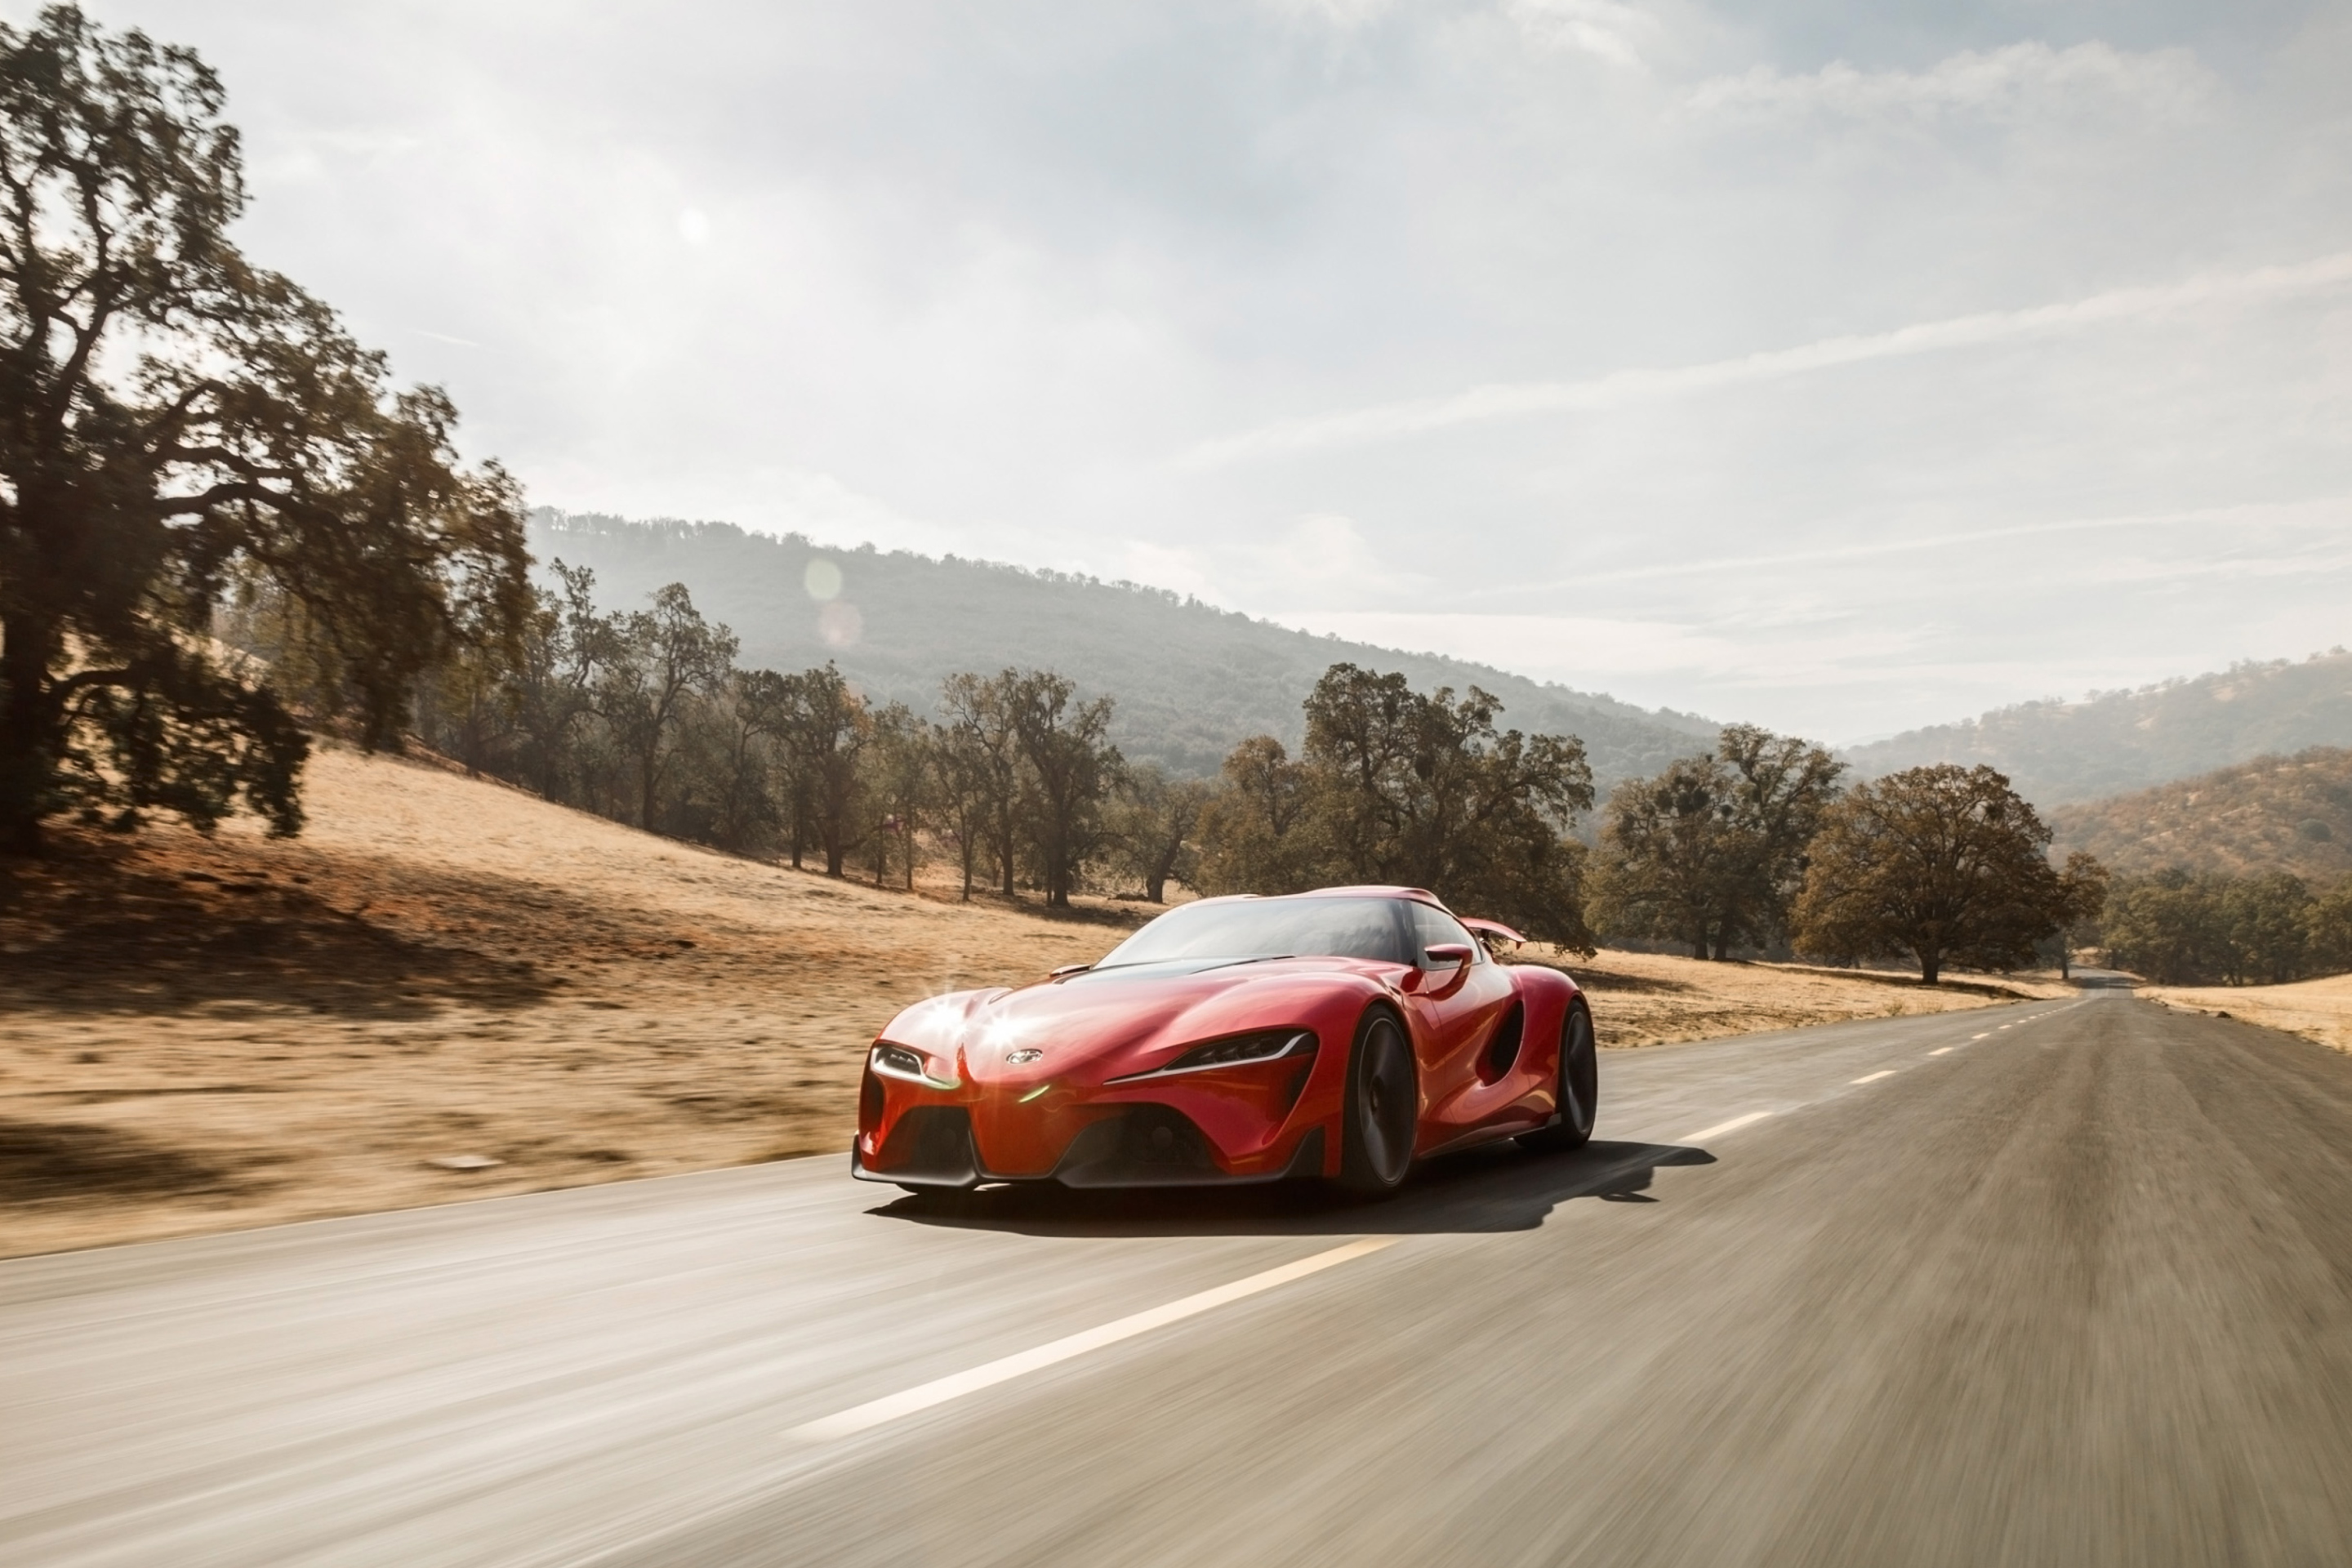 Das 2014 Toyota Ft 1 Concept Front Angle Wallpaper 2880x1920